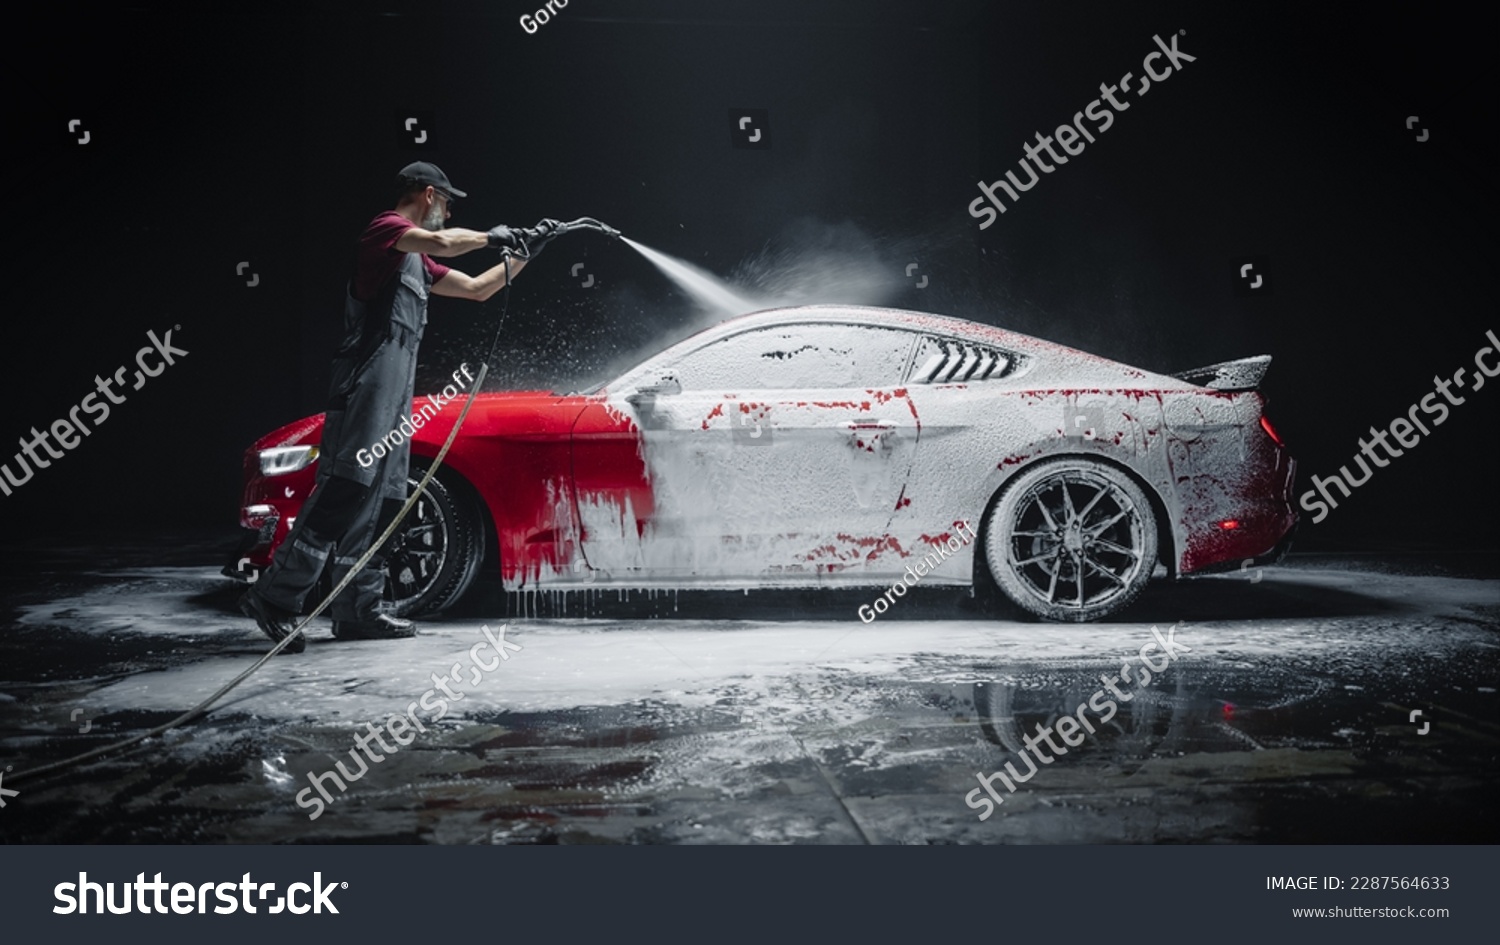 Car Wash Expert Using Water Pressure Washer to Clean a Red Modern Sportscar. Adult Man Washing Away Dirt, Preparing an American Muscle Car for Detailing. Creative Cinematic Photo with Luxury Vehicle #2287564633